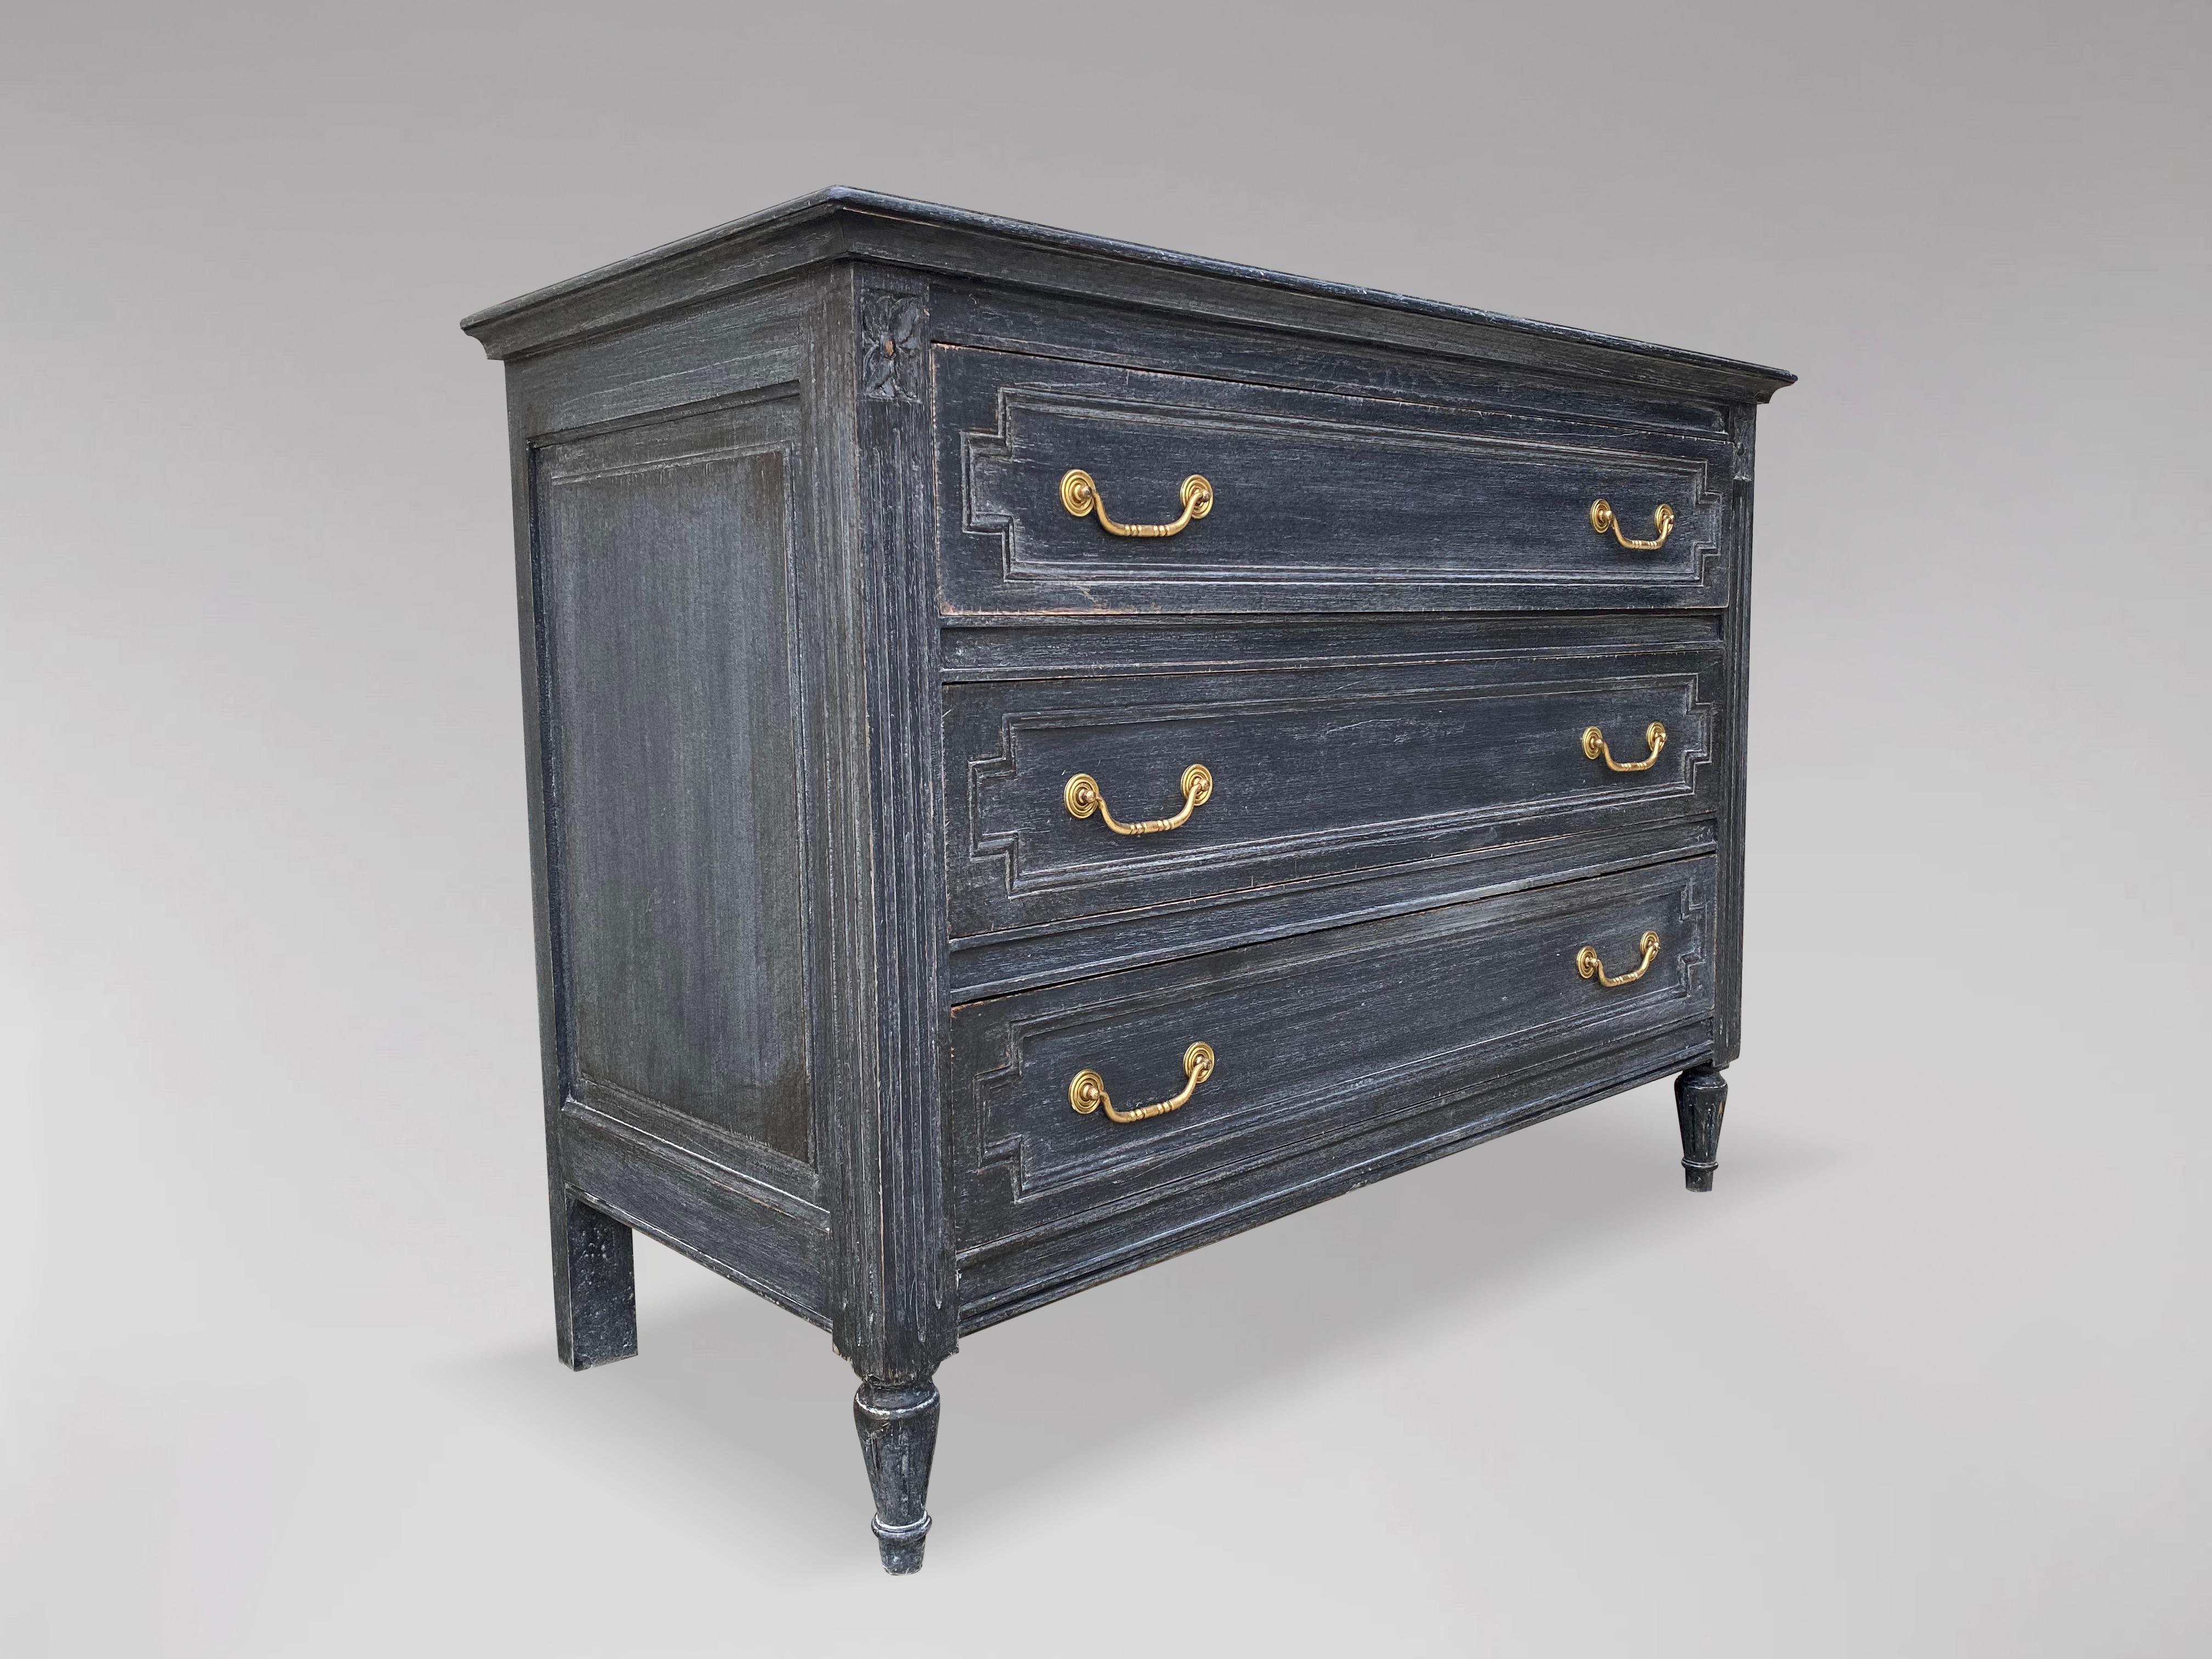 An attractive late 19th century French provincial Louis XVI style painted commode or chest of drawers. Having a wonderfully distressed blue gray painted finish with dark charcoal accents, circa 1890s. Rectangular moulded top above a set of three